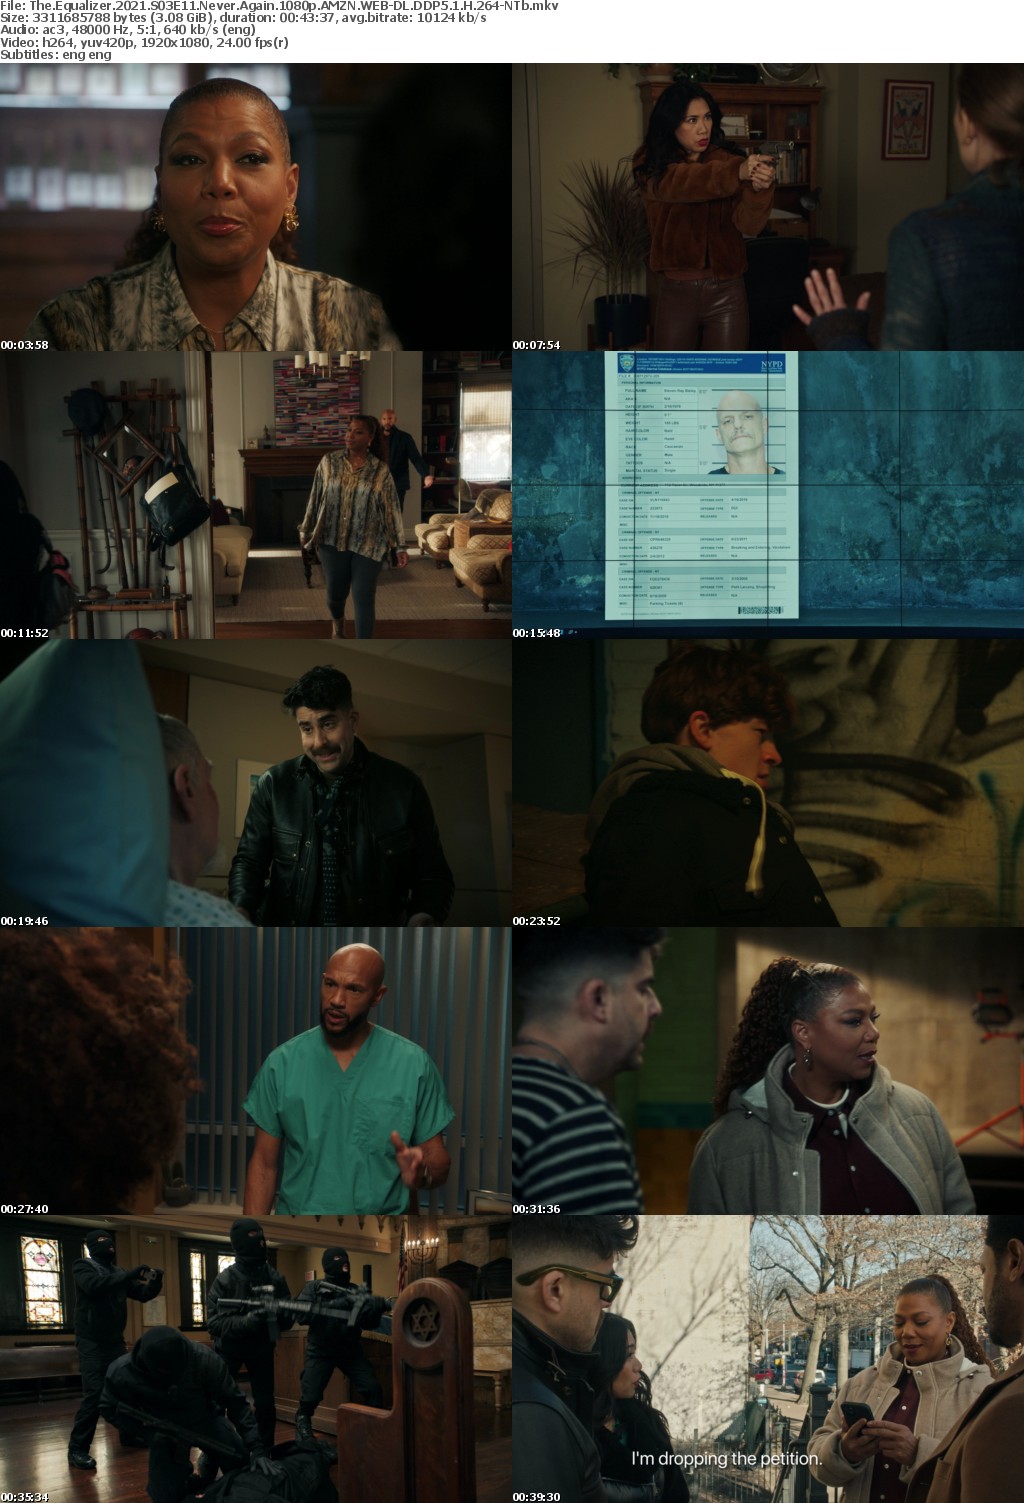 The Equalizer 2021 S03E11 Never Again 1080p AMZN WEBRip DDP5 1 x264-NTb